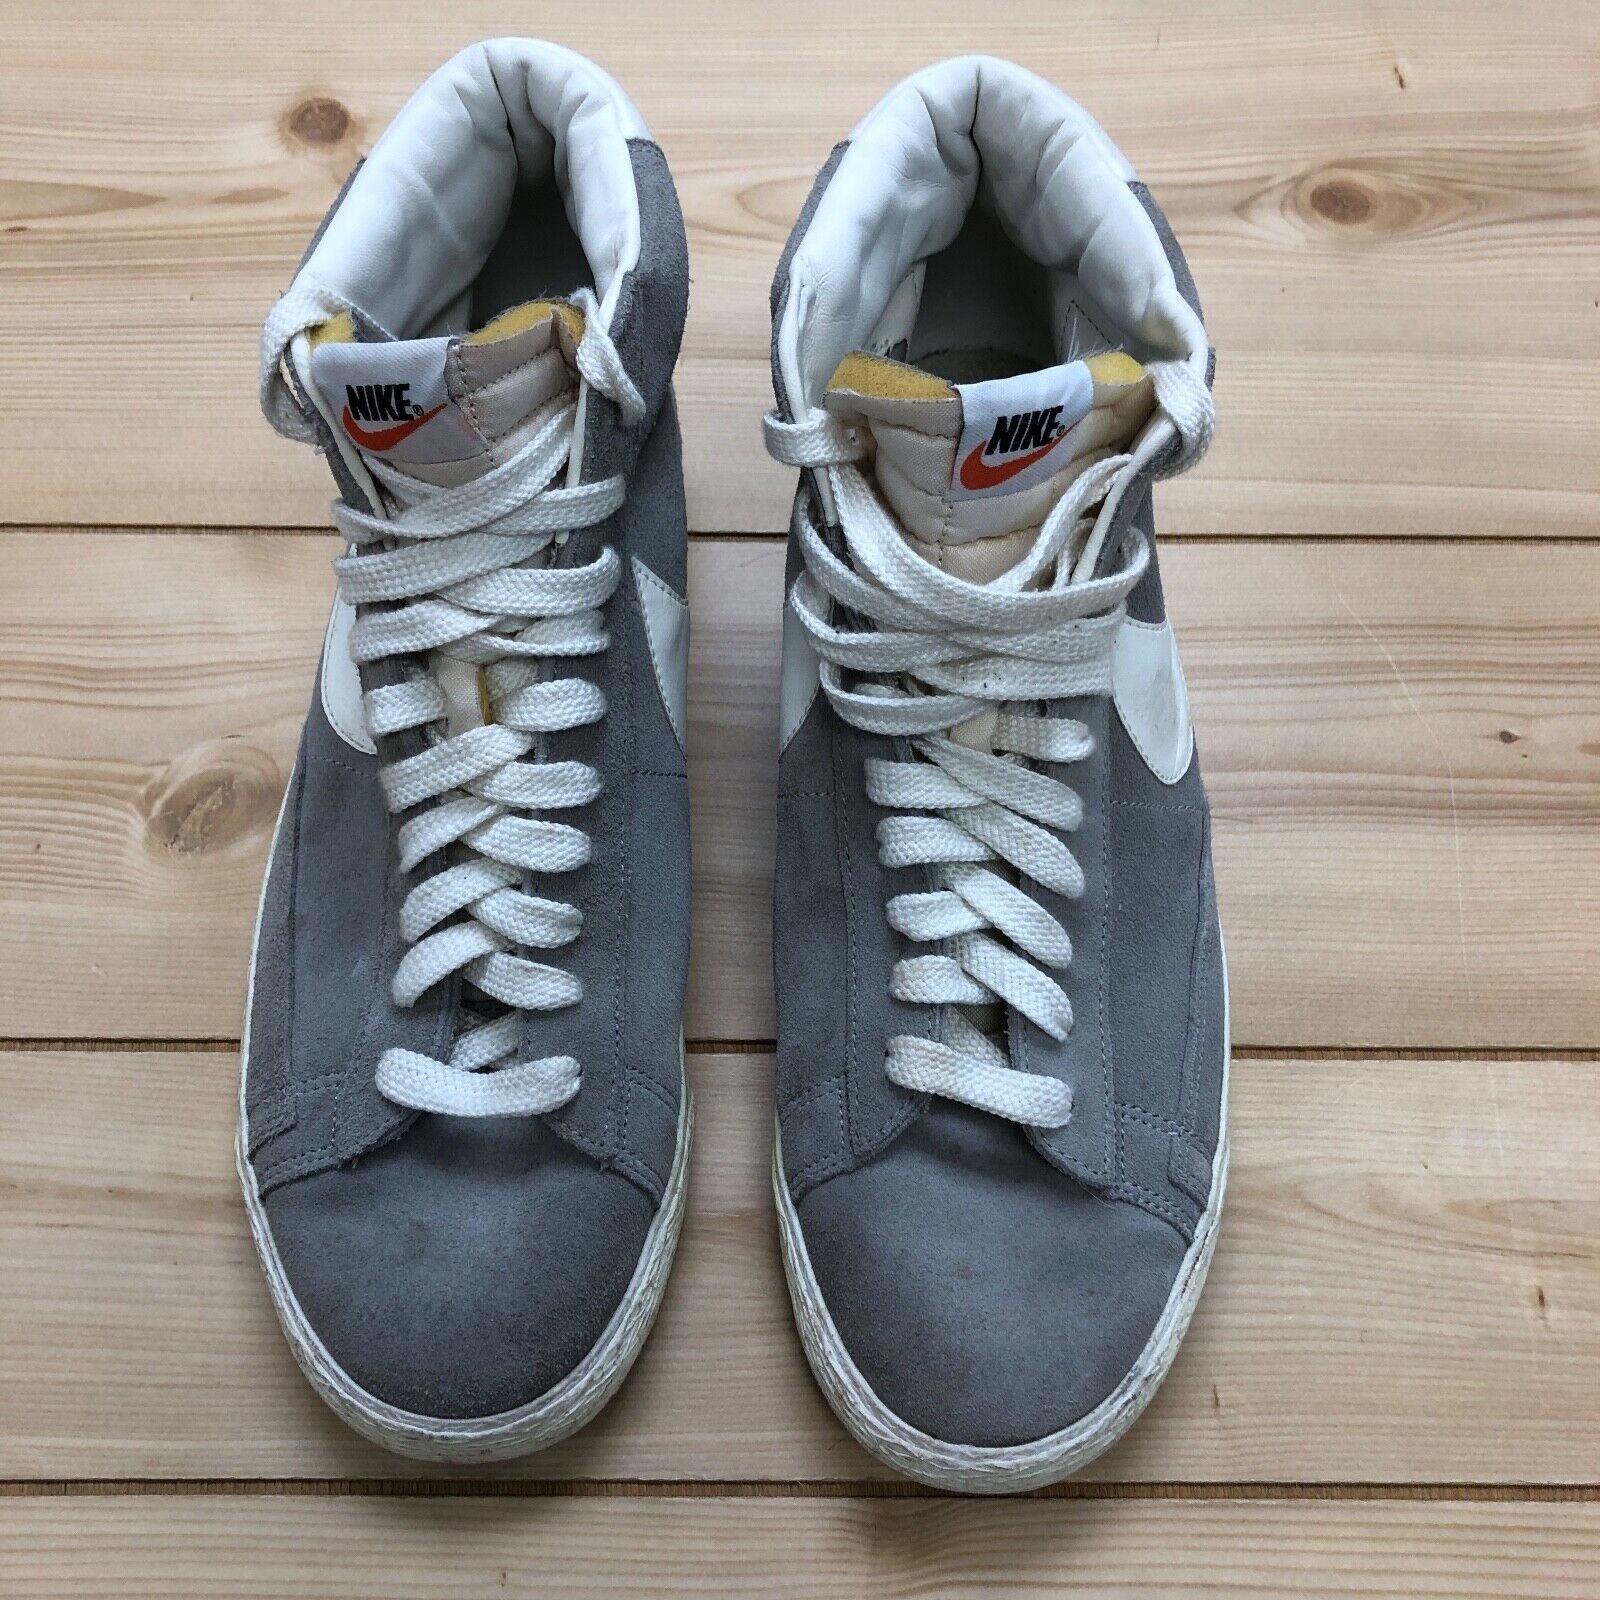 Nike Blazers White/Gray Suede High Top Lace Up White Swoosh Unisex Men Size 12